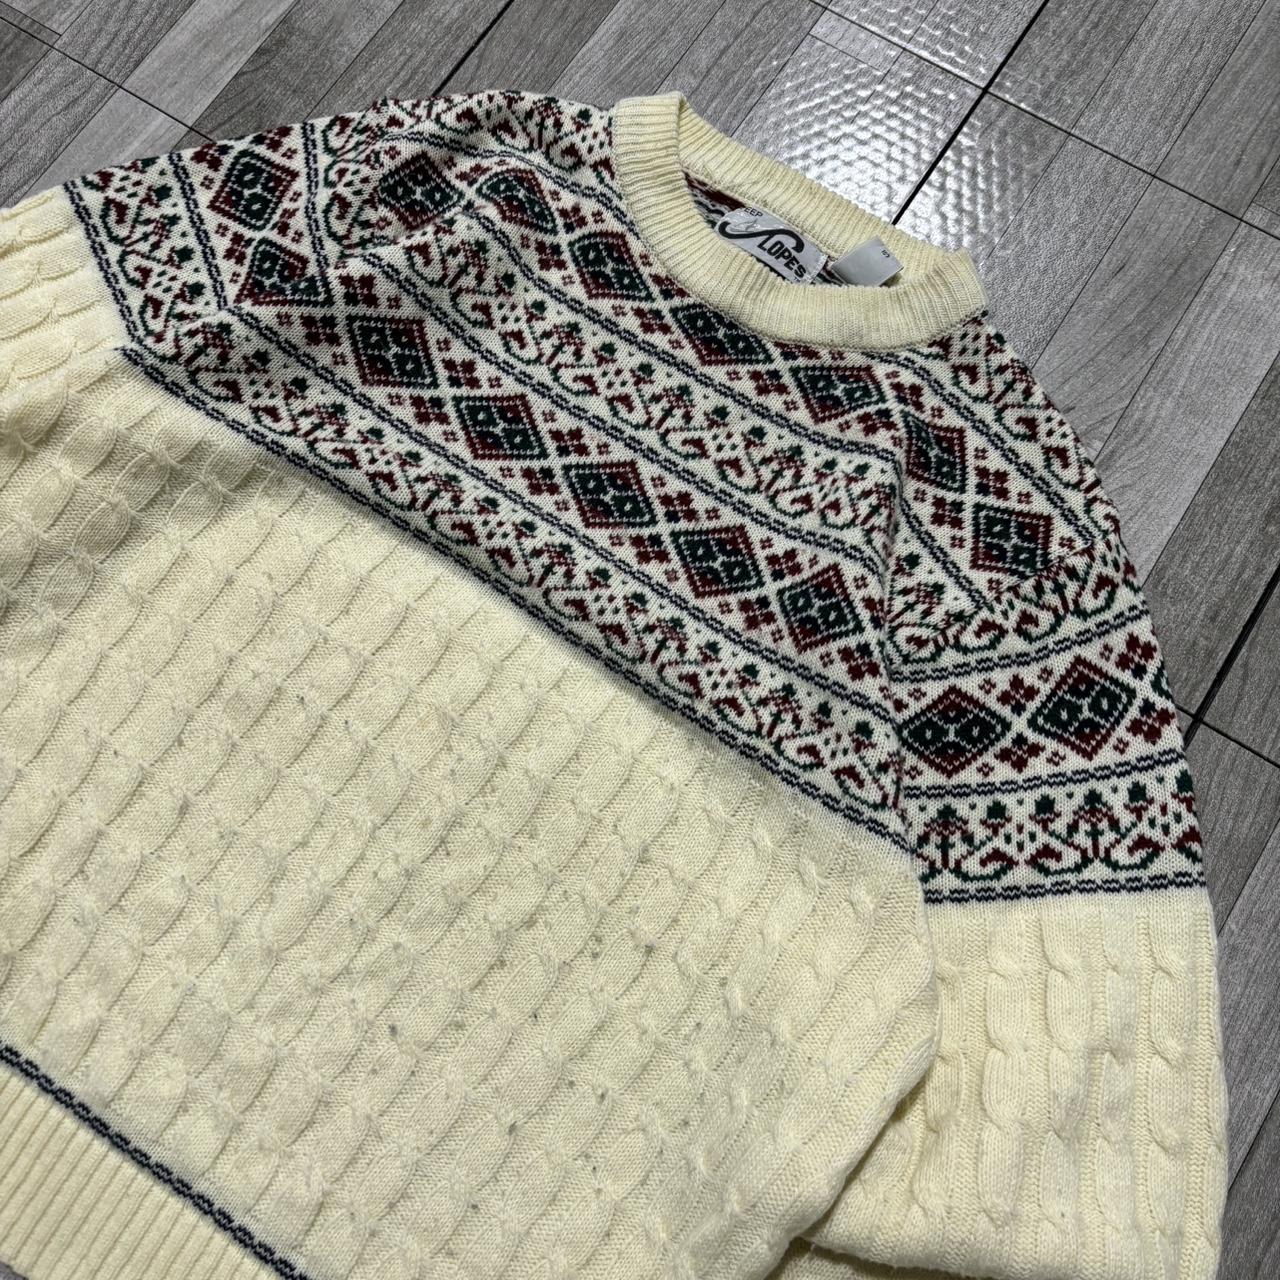 Thick knitted sweater - Depop